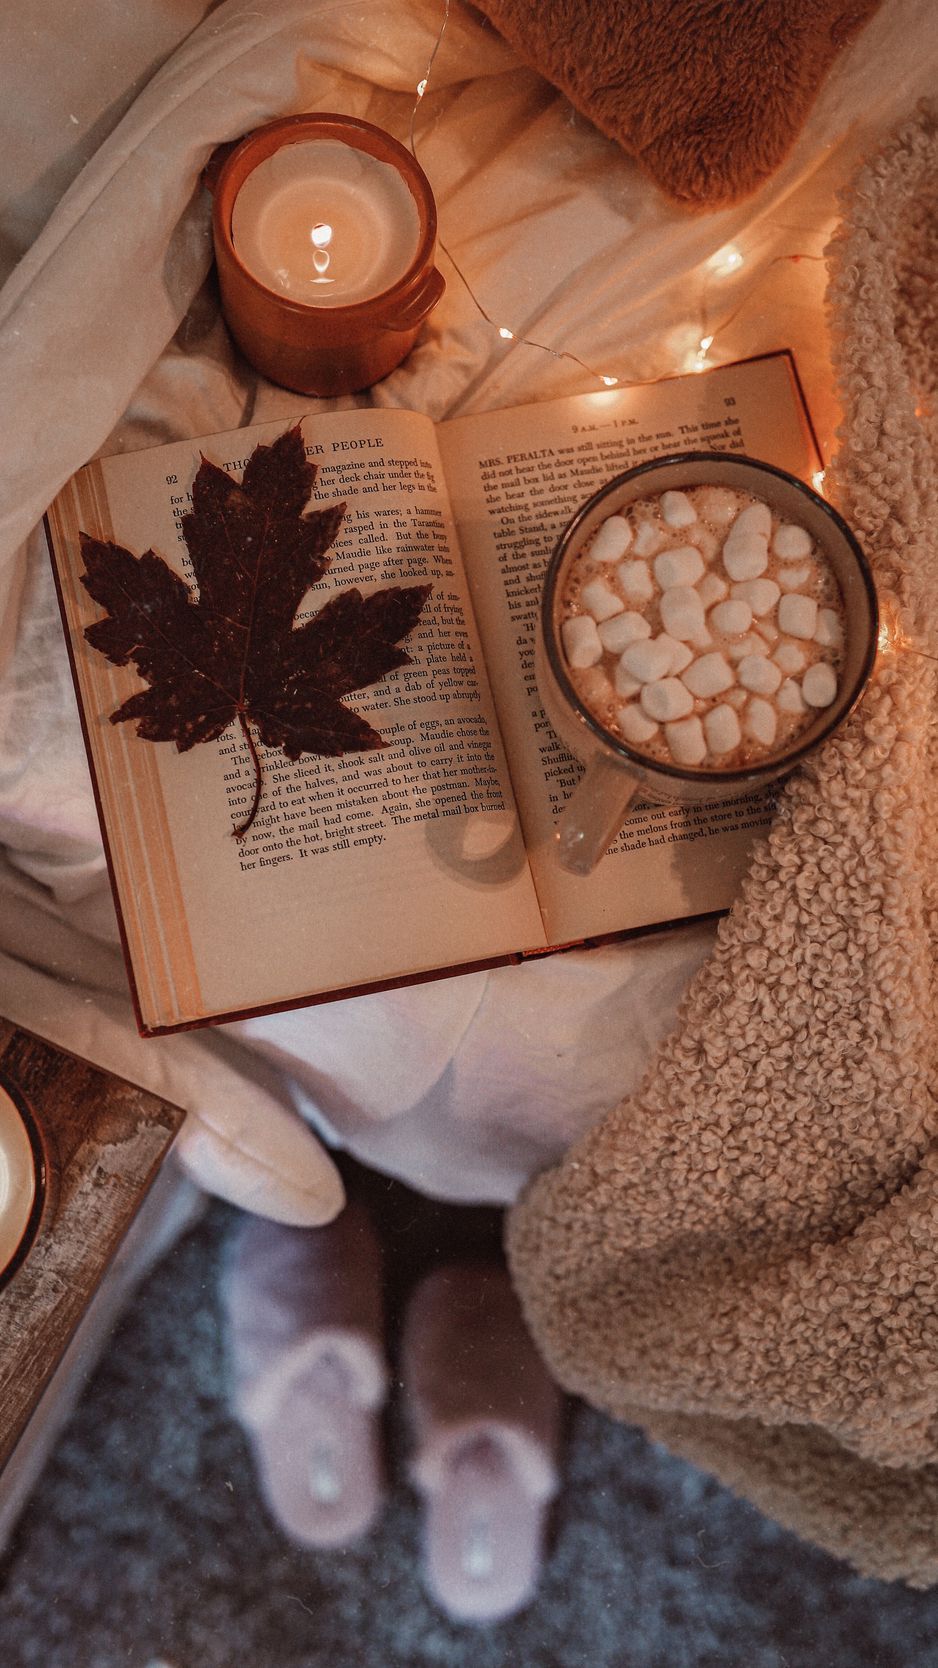 A book and some marshmallows on top of the bed - Cozy